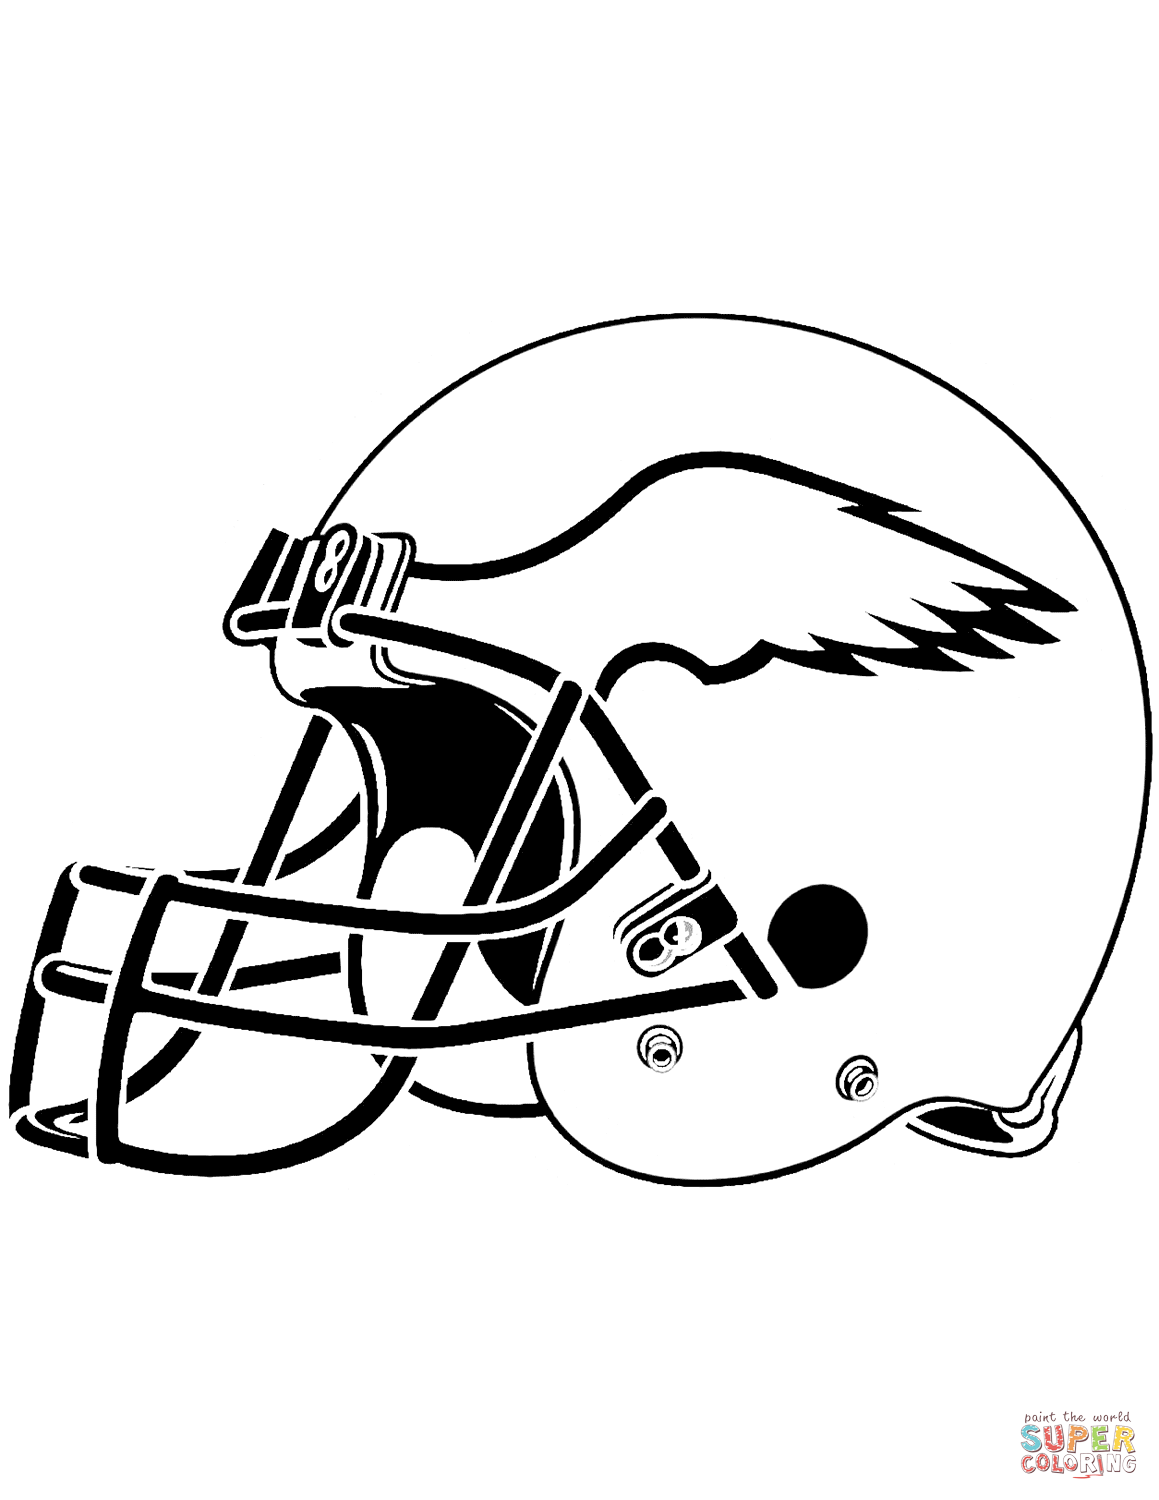 Philadelphia eagles helmet coloring page free printable coloring pages